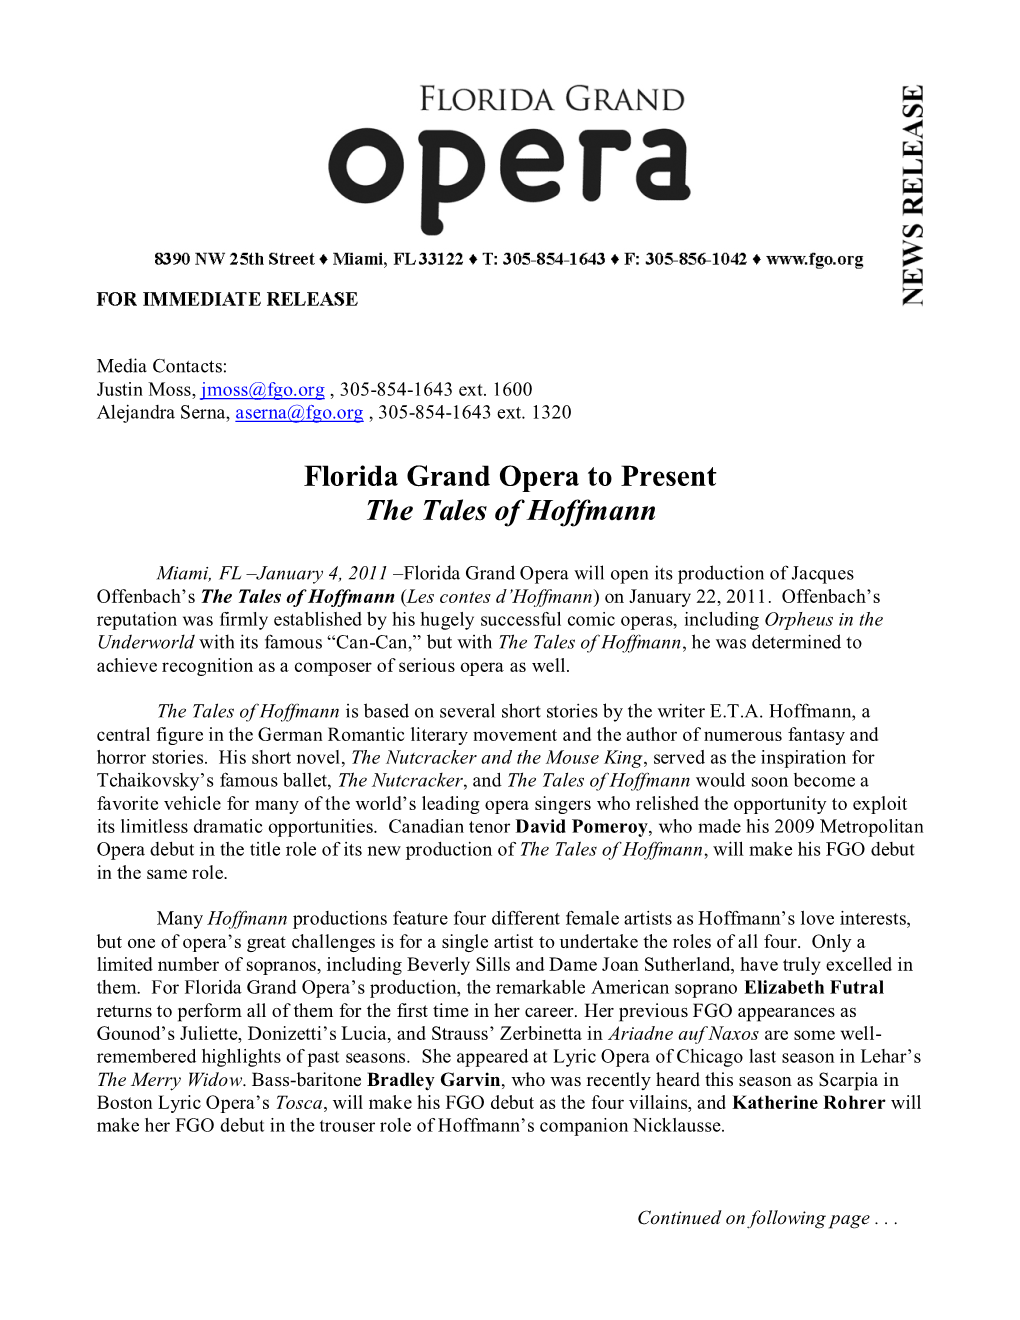 Florida Grand Opera to Present the Tales of Hoffmann